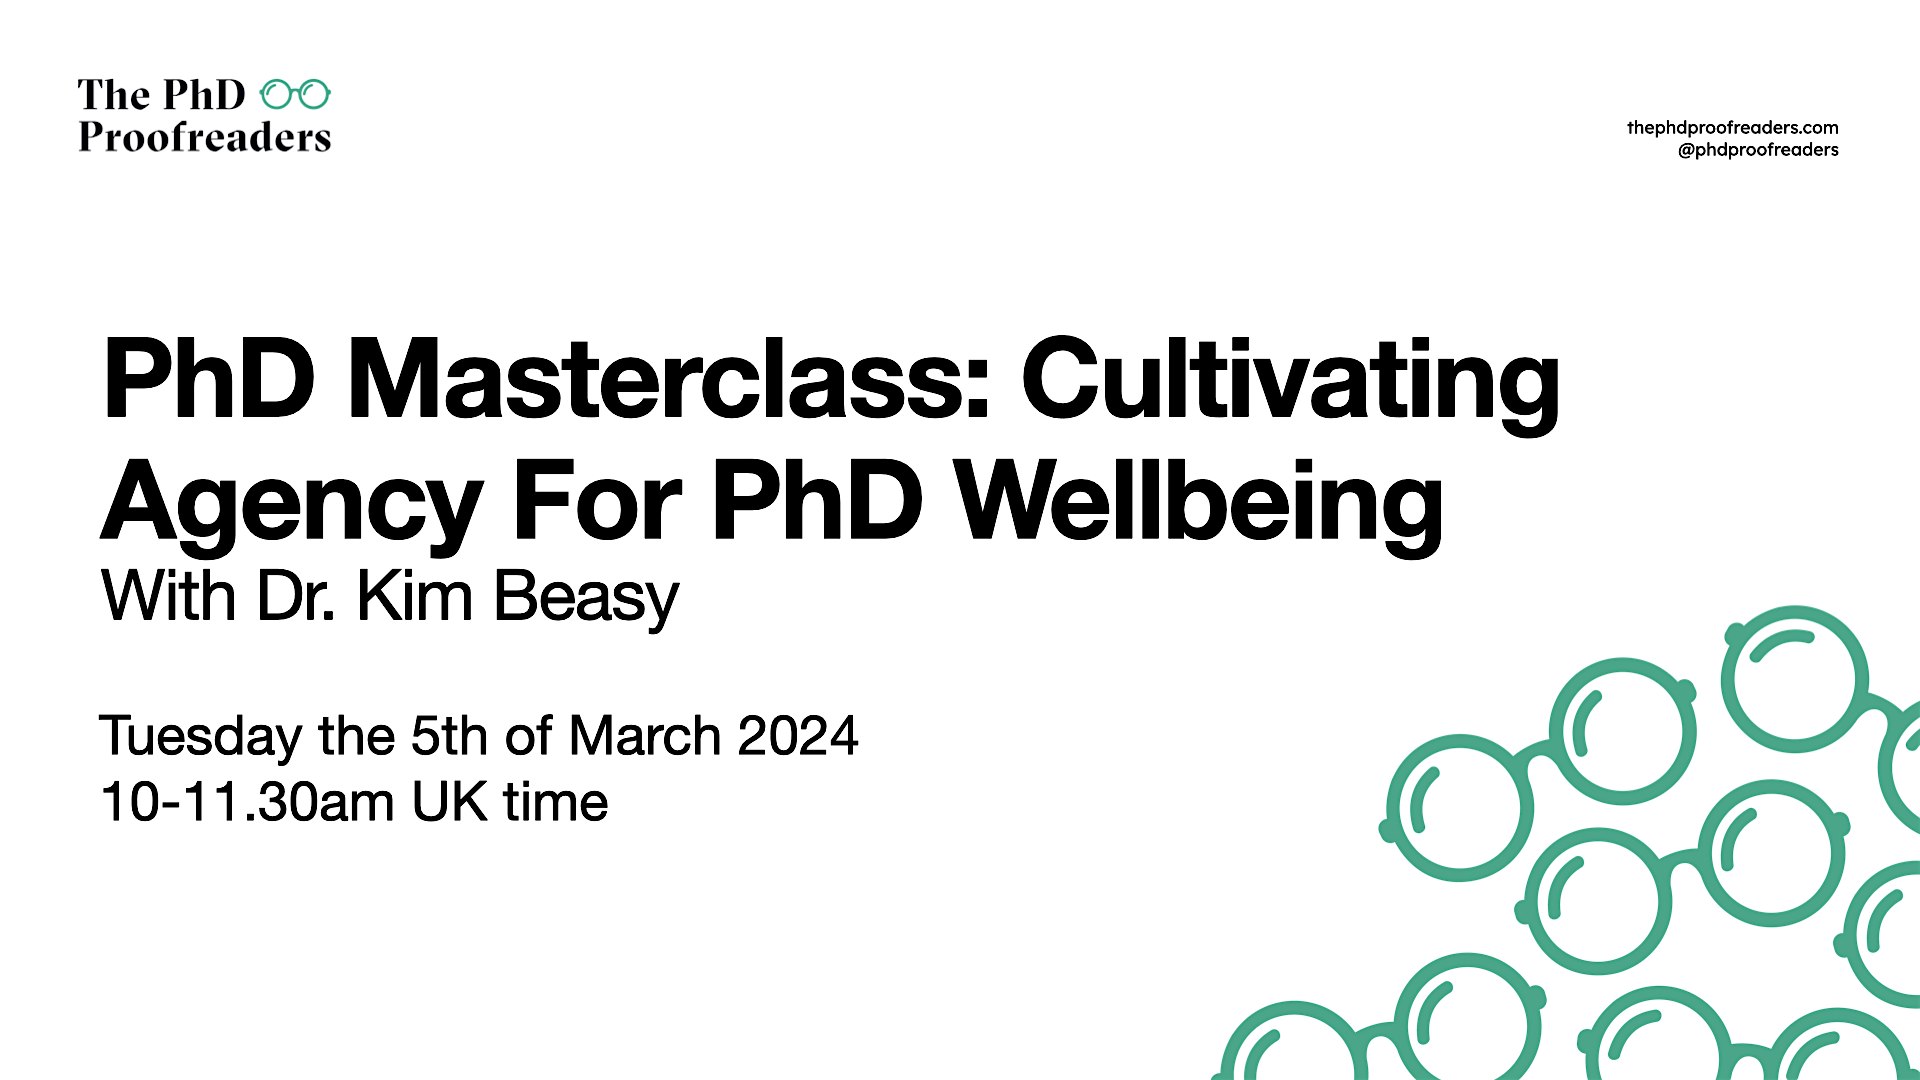 PhD Masterclass: Cultivating Agency for PhD Wellbeing